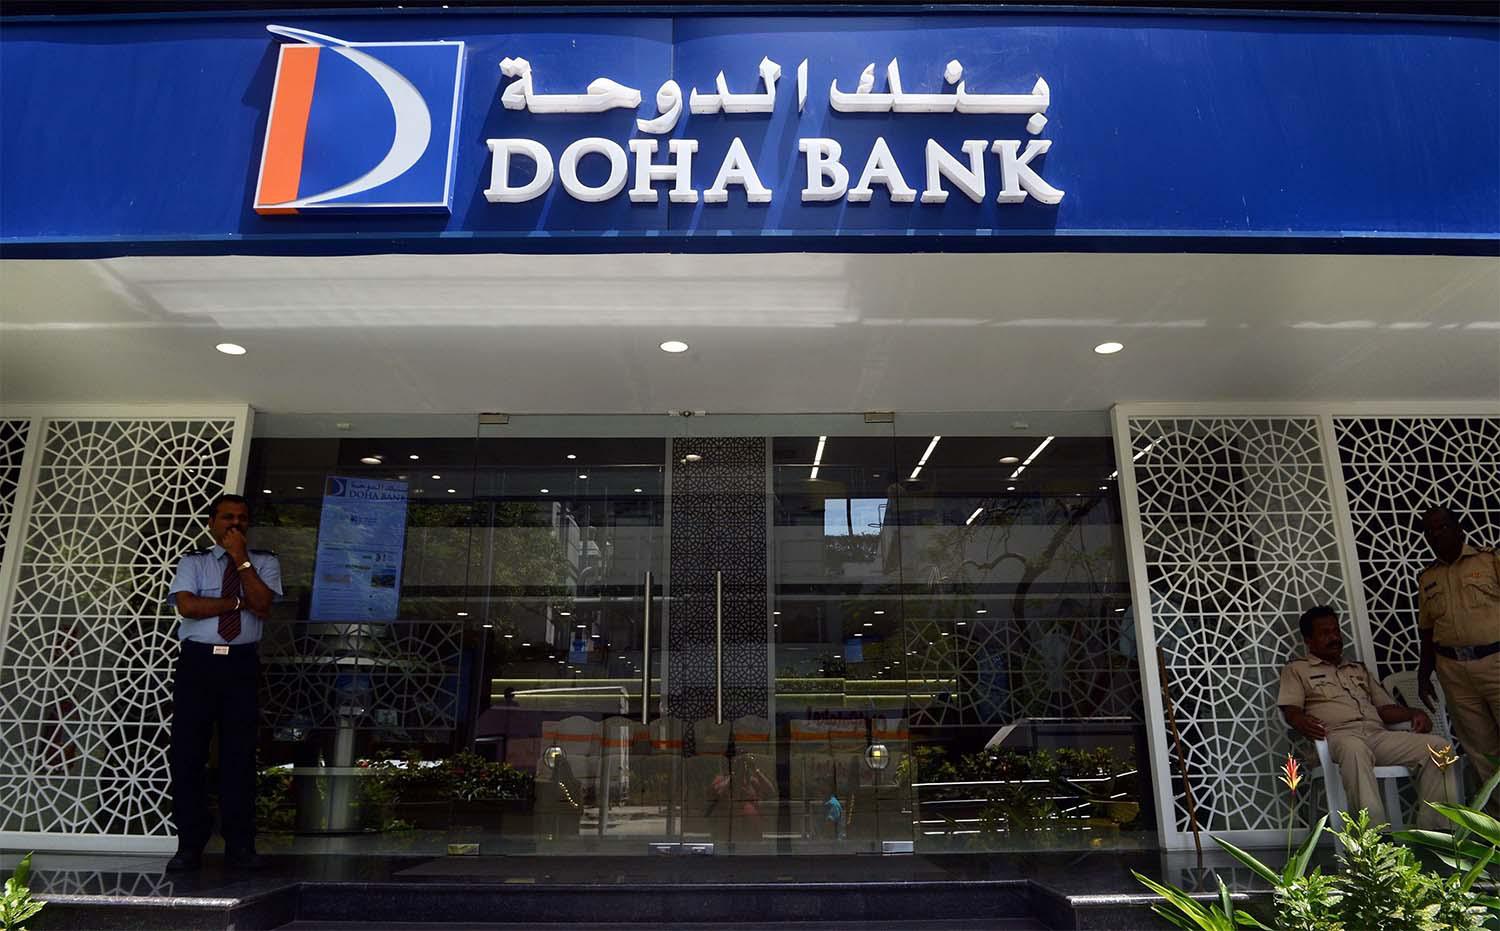 Doha Bank is the largest private commercial bank in Qatar